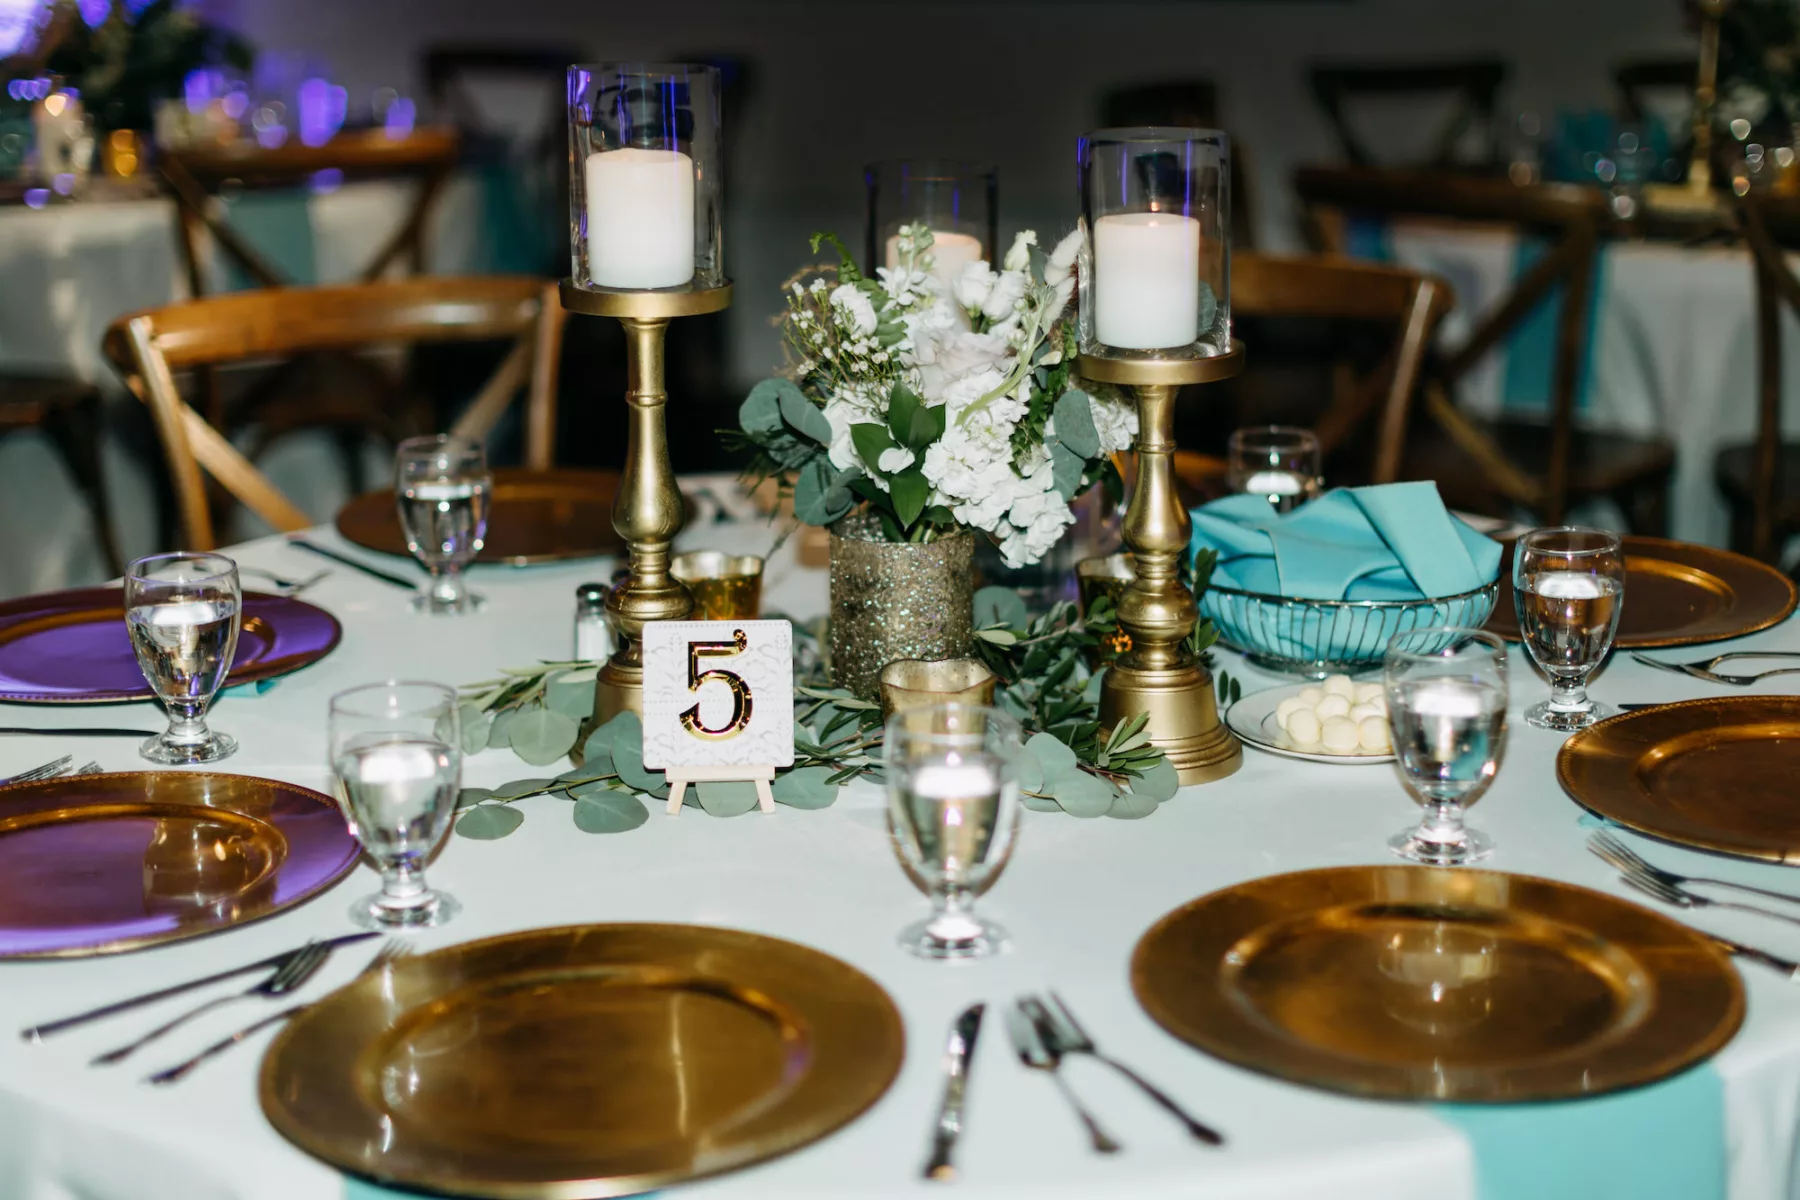 Boho Wedding Reception Centerpiece Decor Ideas | Gold Chargers, Blue Linen Tablescape | Candles, Gold Votives, and Table Numbers | White Flowers, Fern, and Greenery Floral Arrangement Inspiration